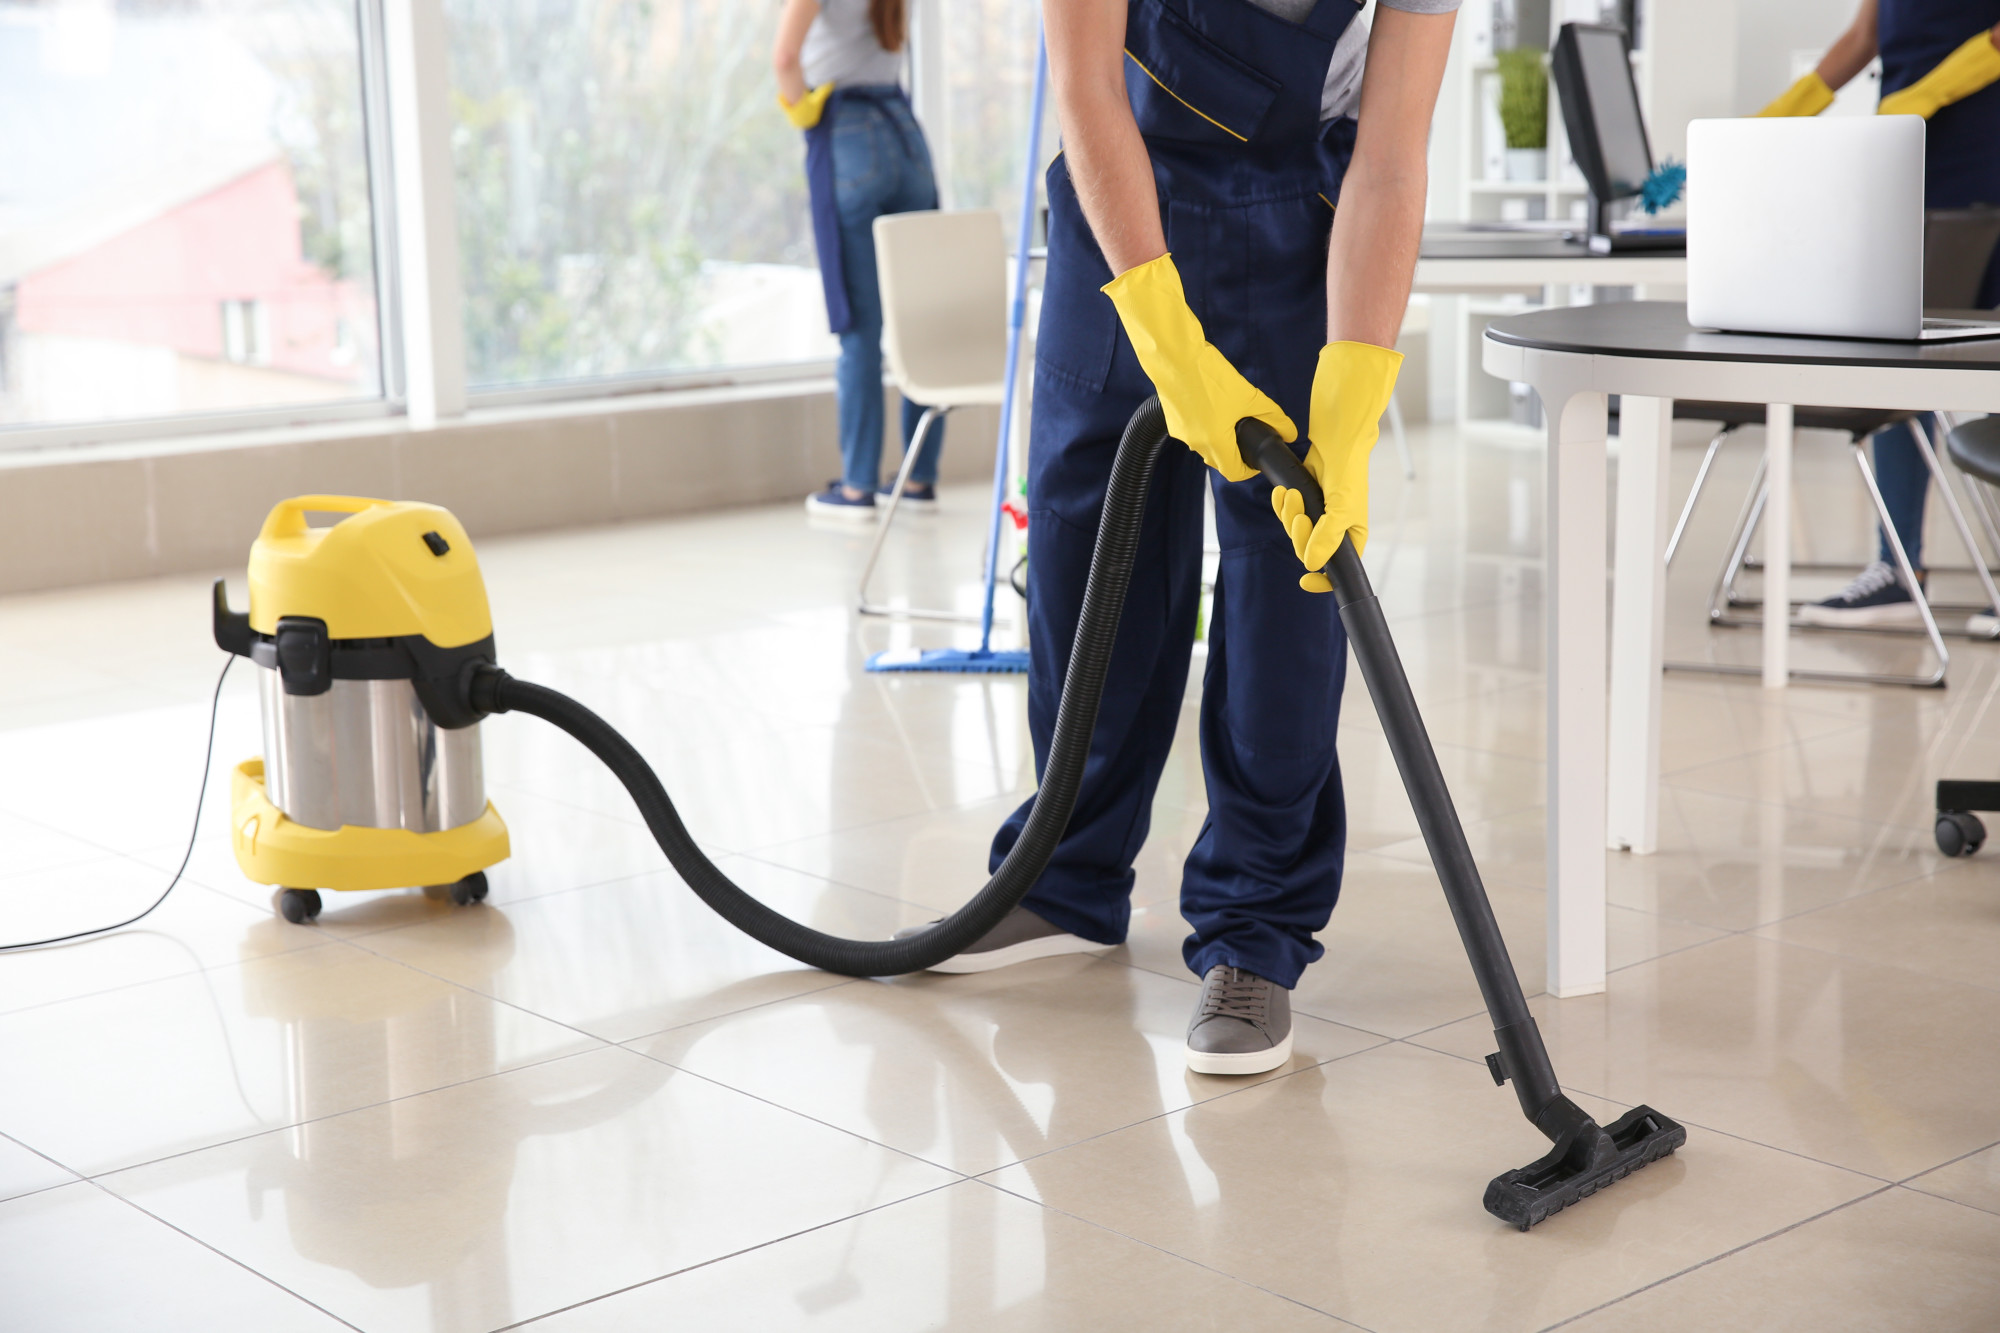 professional cleaner vacuuming a tile floor